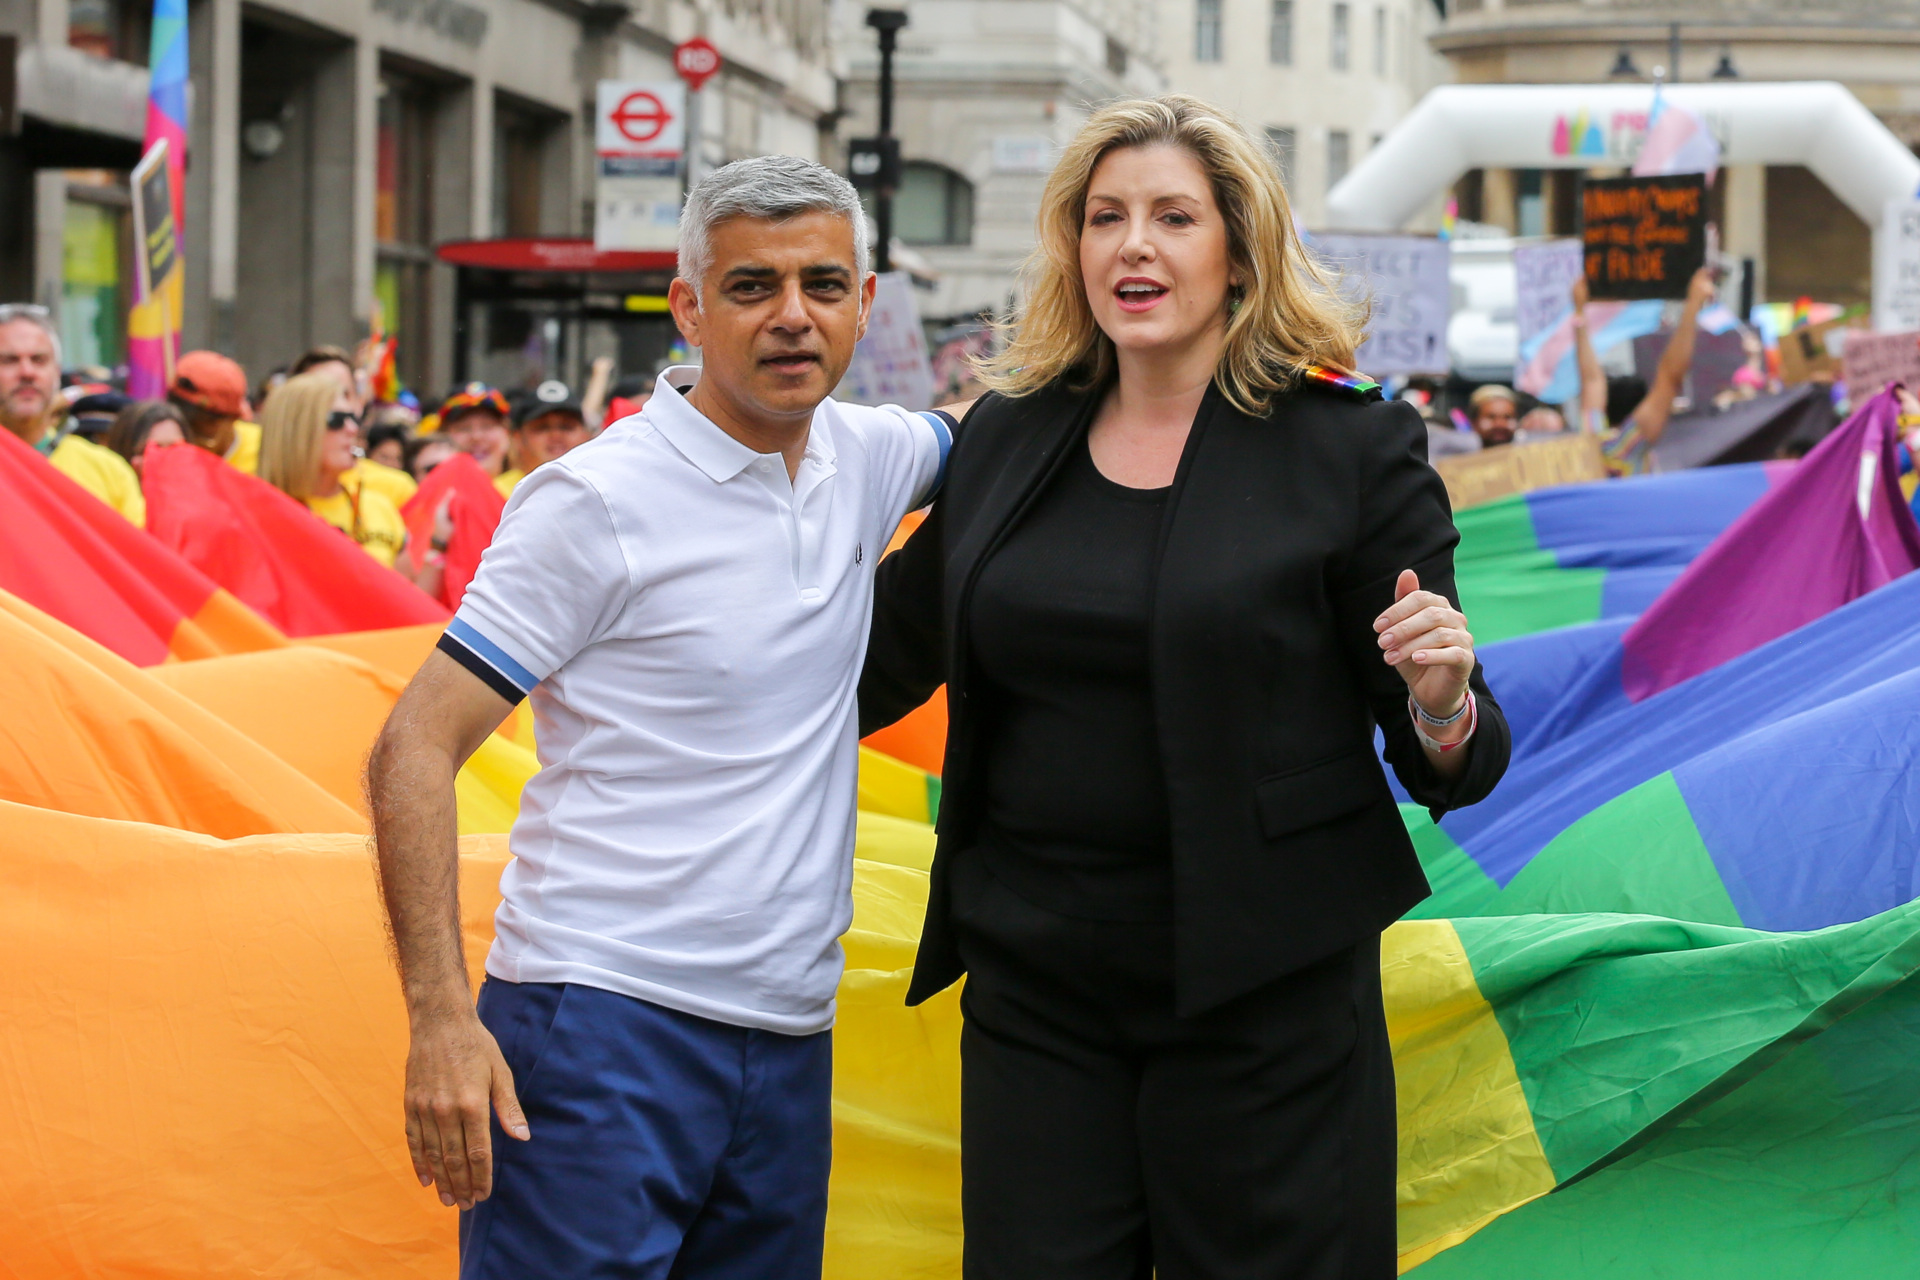 LONDON, UK, UNITED KINGDOM - 2019/07/06: Mayor of London, Sadiq Khan (L) and Penny Mordaunt Minister for Women and Equalities (R) are seen during the parade. The biggest ever, Pride In London parade in central London. An estimated over 1 million people lined along the route in support of the LGBT (Lesbian, Gay, Bisexual and Transgender / Transsexual) community. (Photo by Dinendra Haria/SOPA Images/LightRocket via Getty Images)